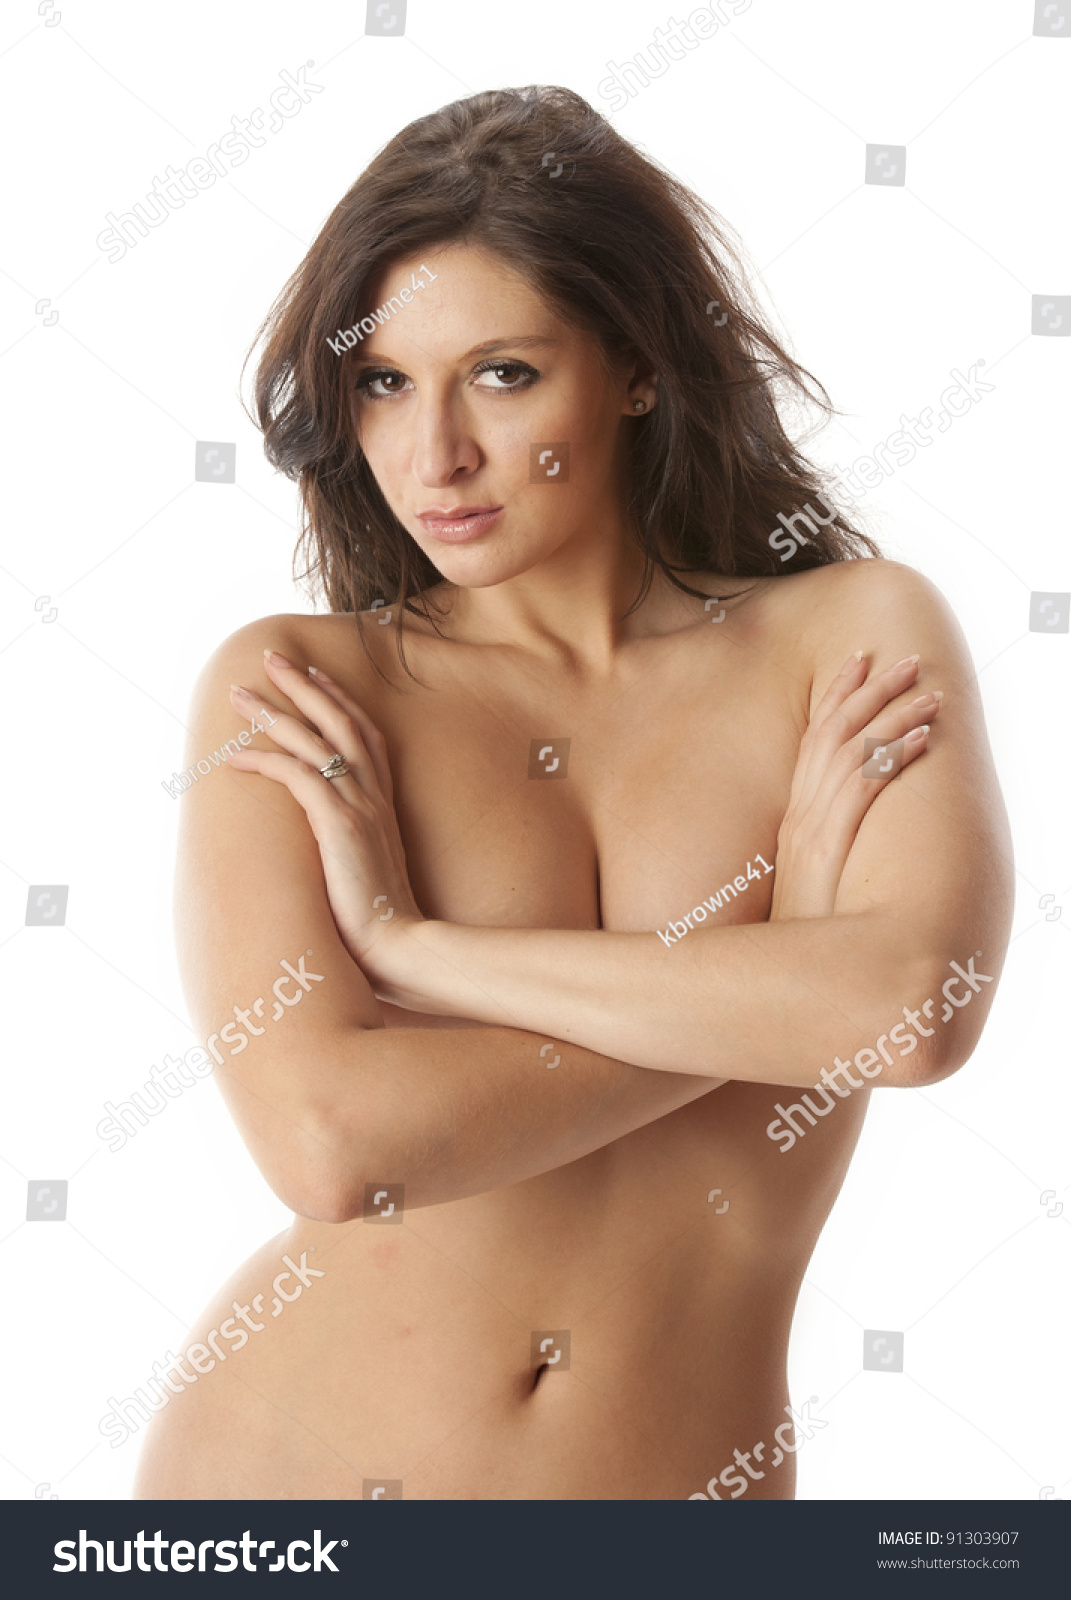 Nude woman beautiful First Naked